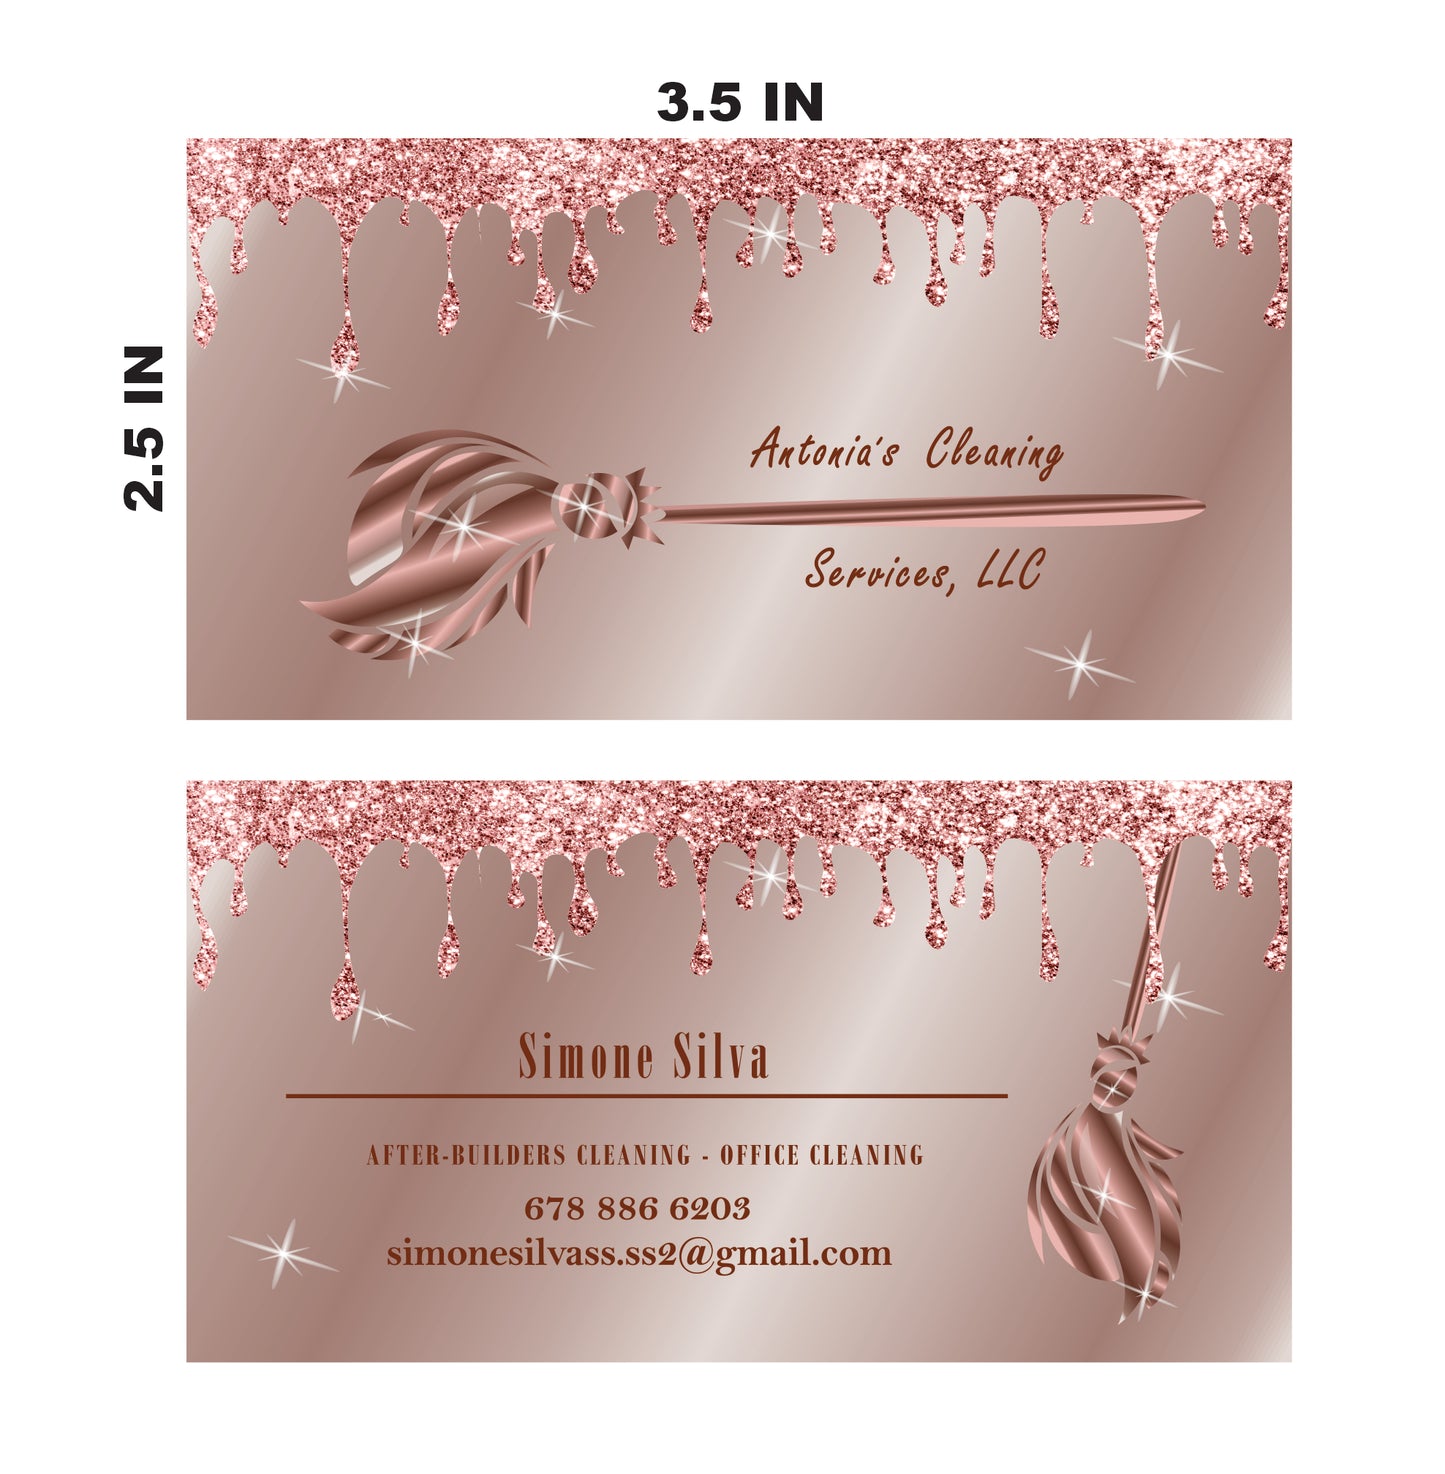 1.000 Business Cards, FULL COLOR BRILLO UV - 14 pt. Gloss Cover